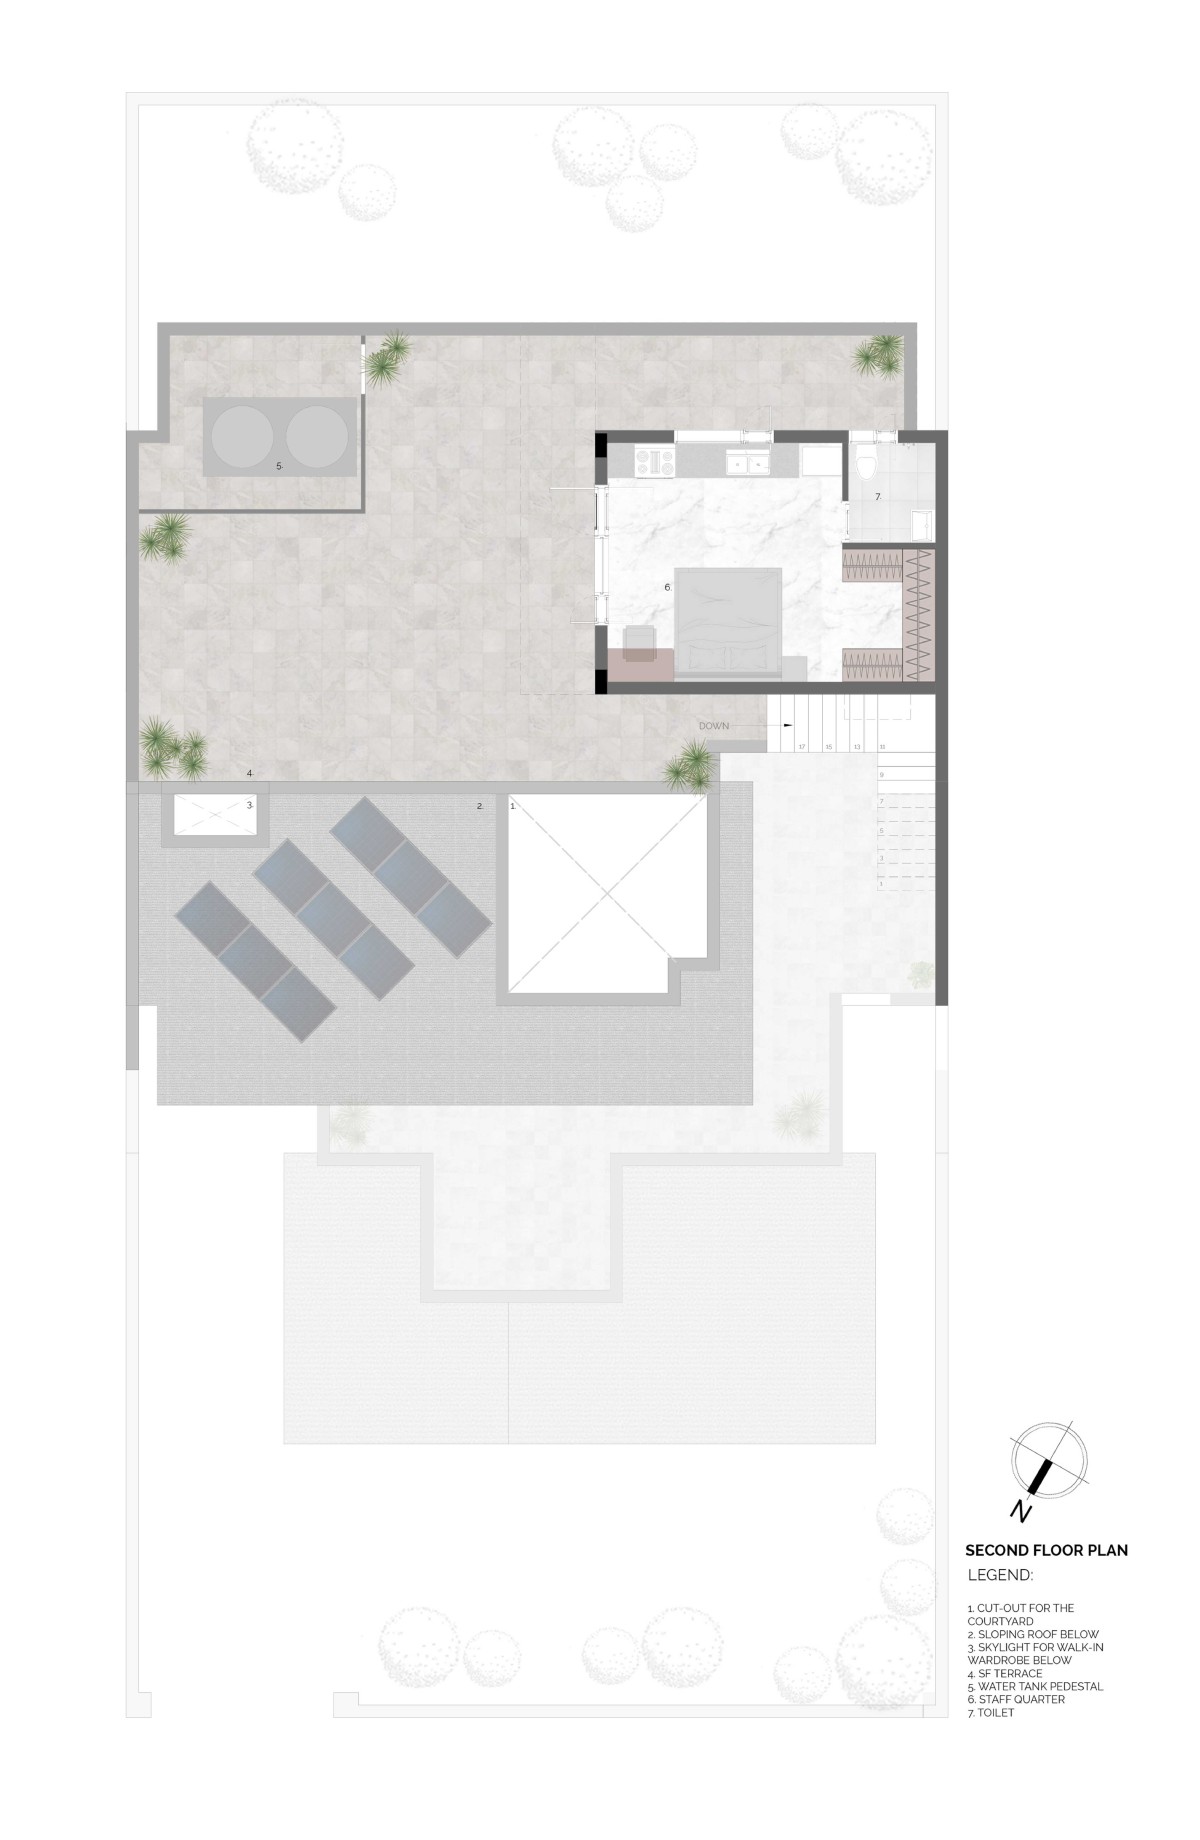 Second Floor Plan of The Tapered House by Studio Mohenjodaro